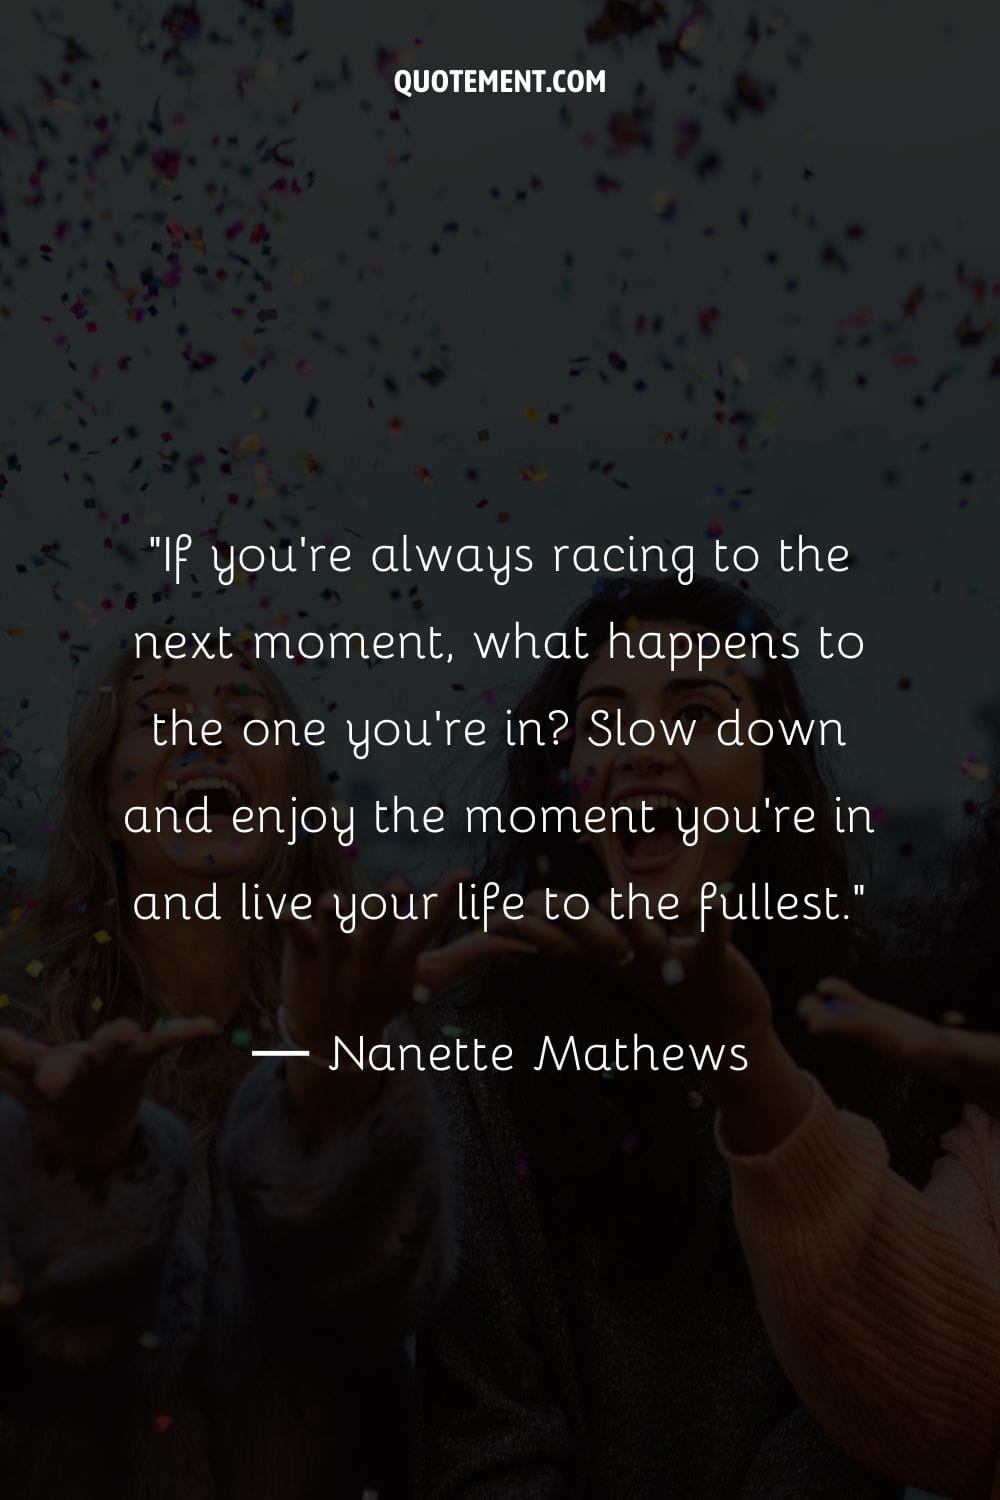 If you're always racing to the next moment, what happens to the one you're in Slow down and enjoy the moment you're in and live your life to the fullest.